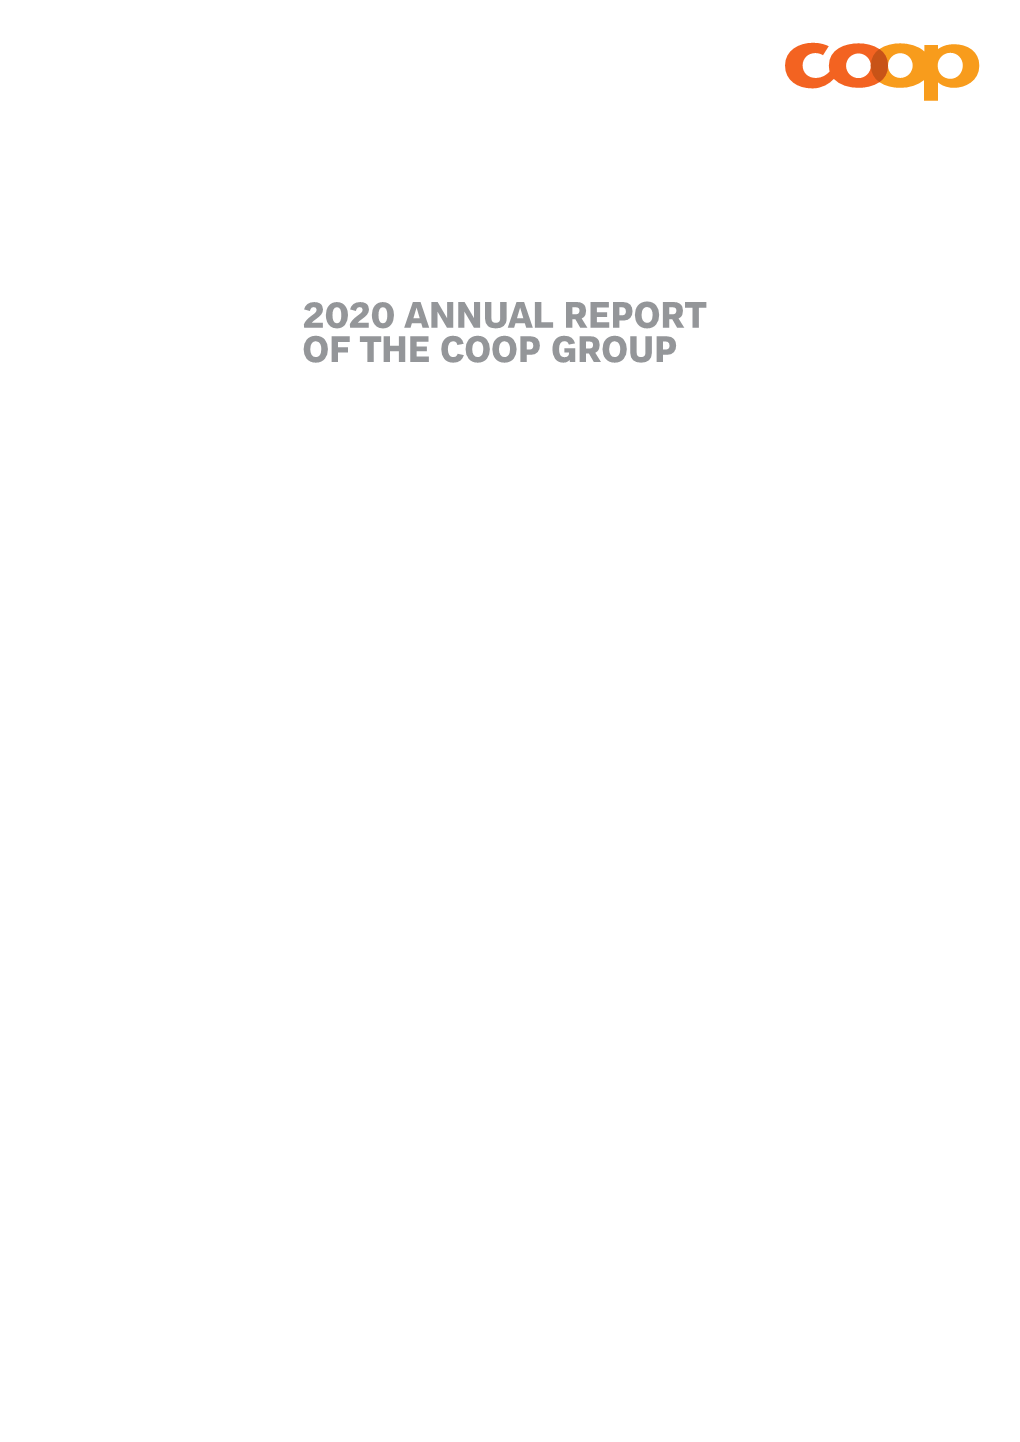 2020 ANNUAL REPORT of the COOP GROUP Publishing Information